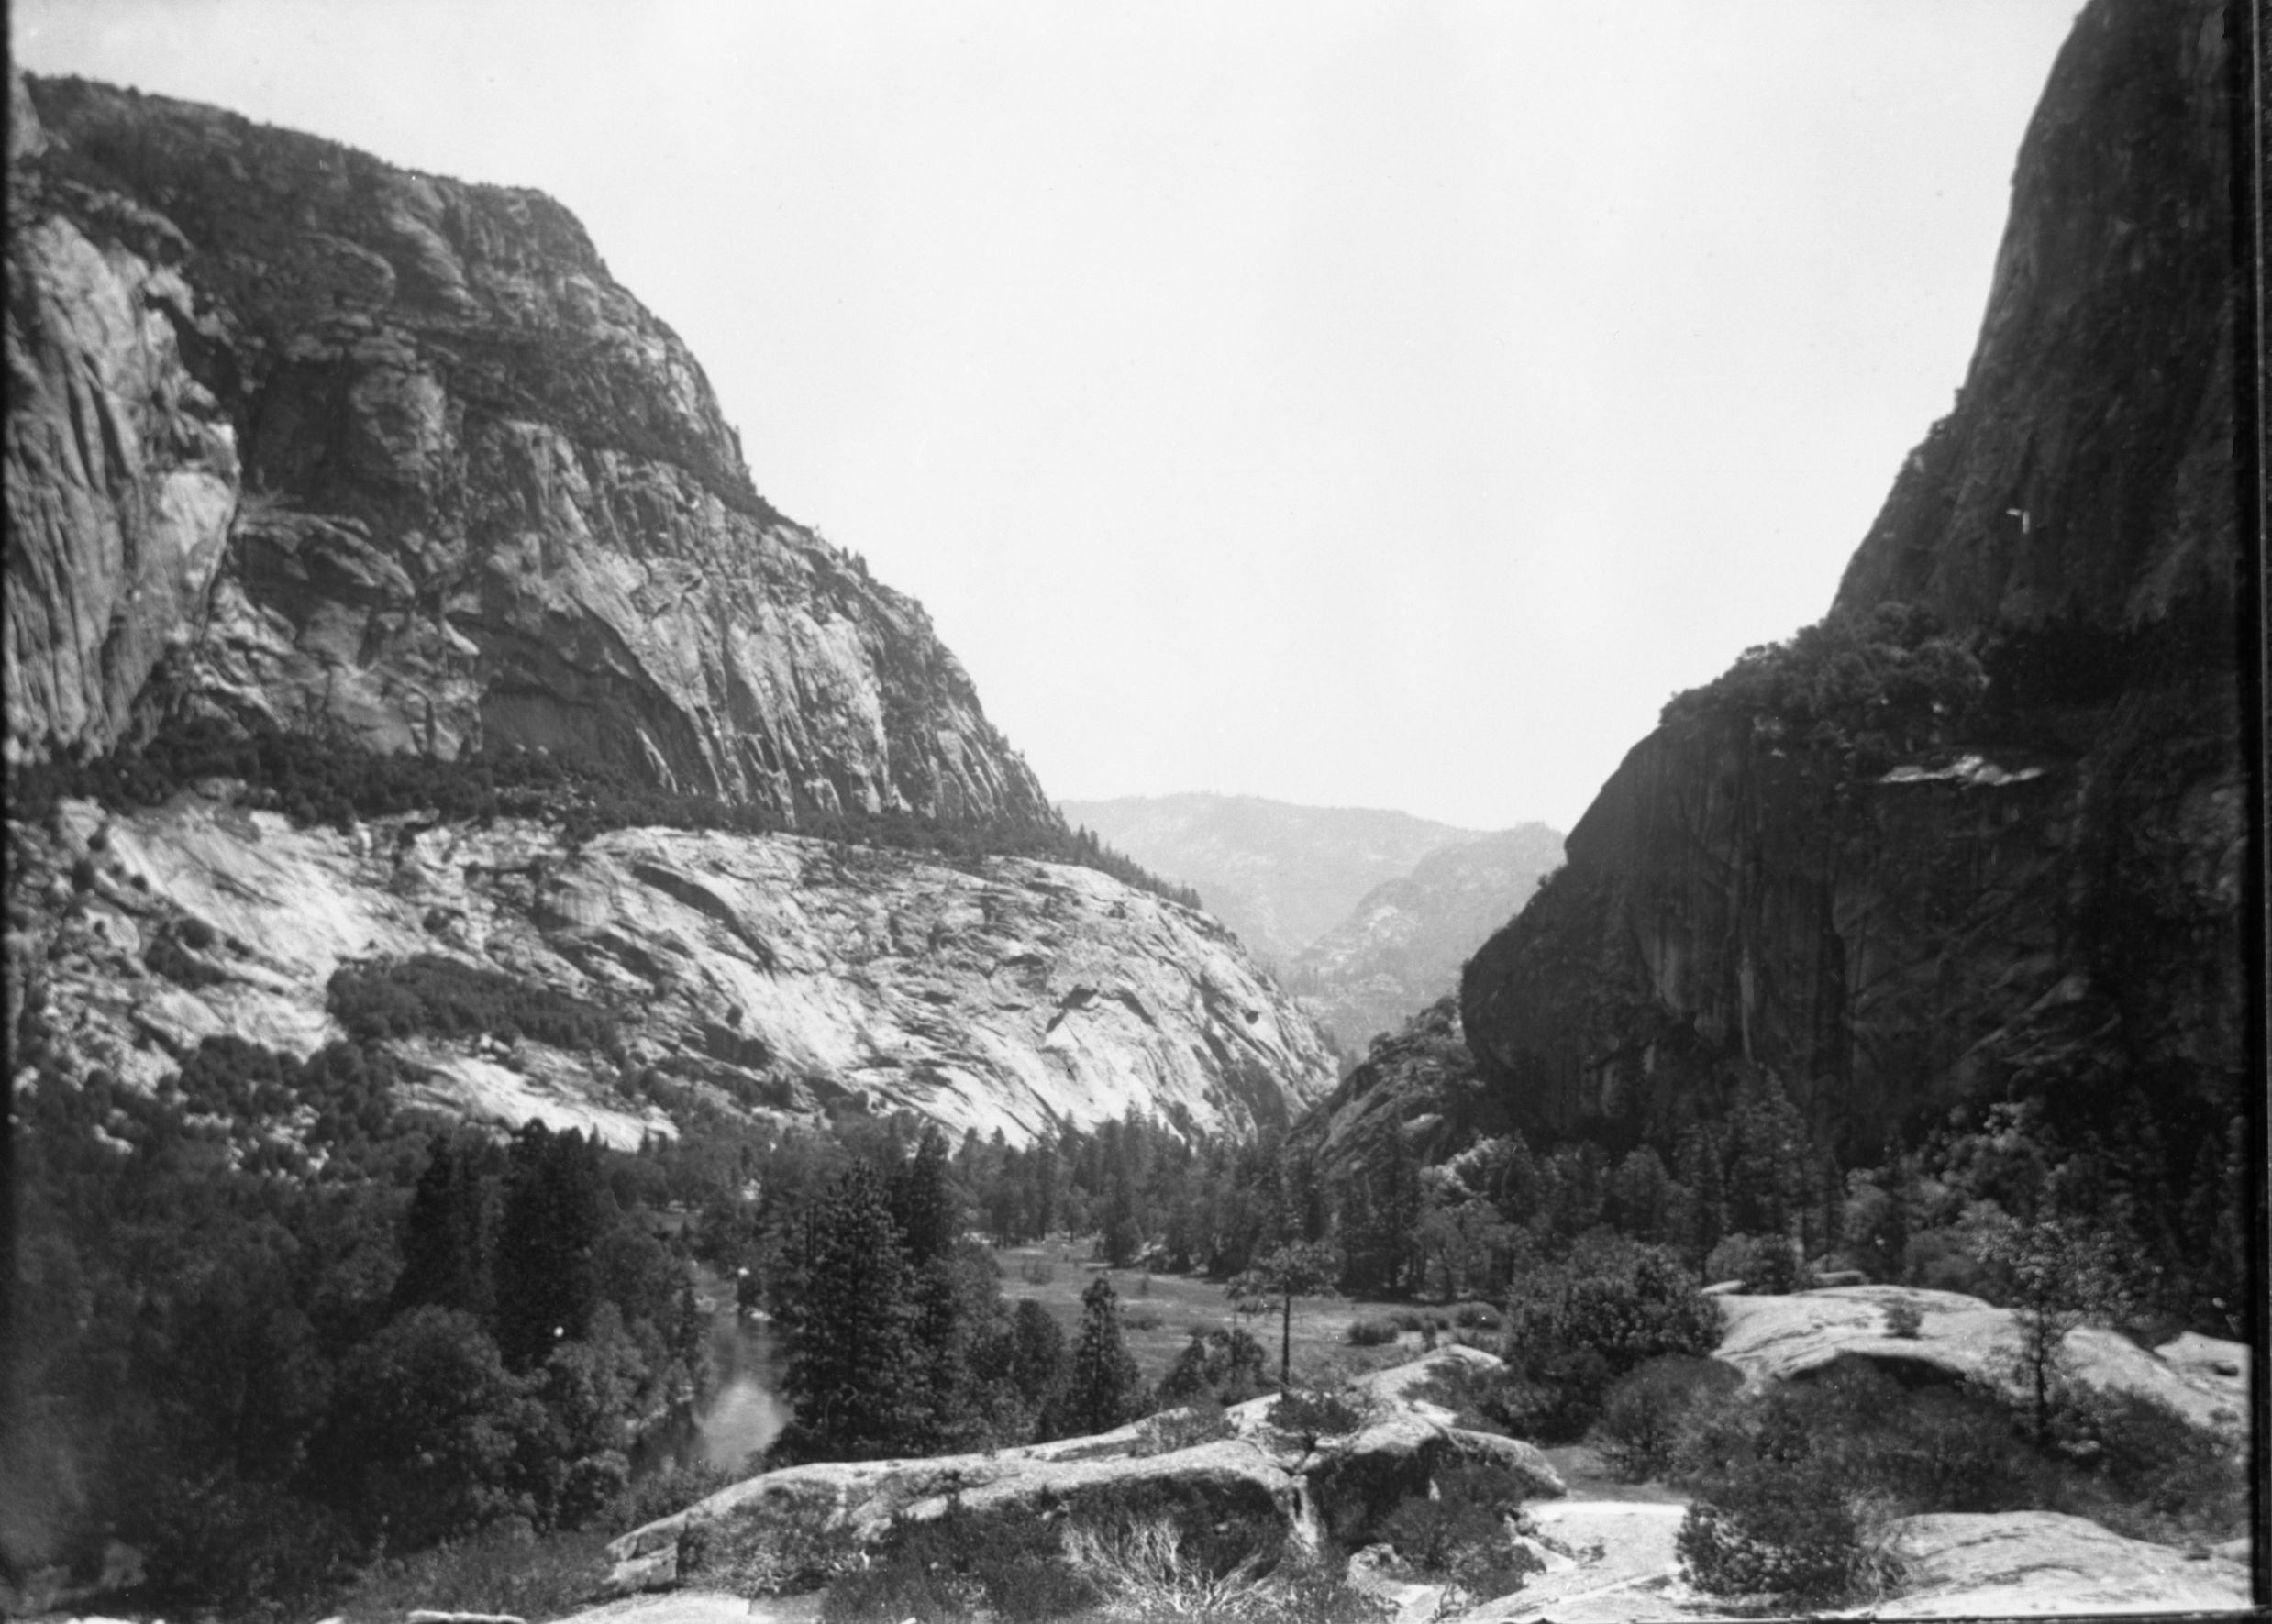 Hetch Hetchy Valley. Original in the YNP Collection (Cat. #20,180).